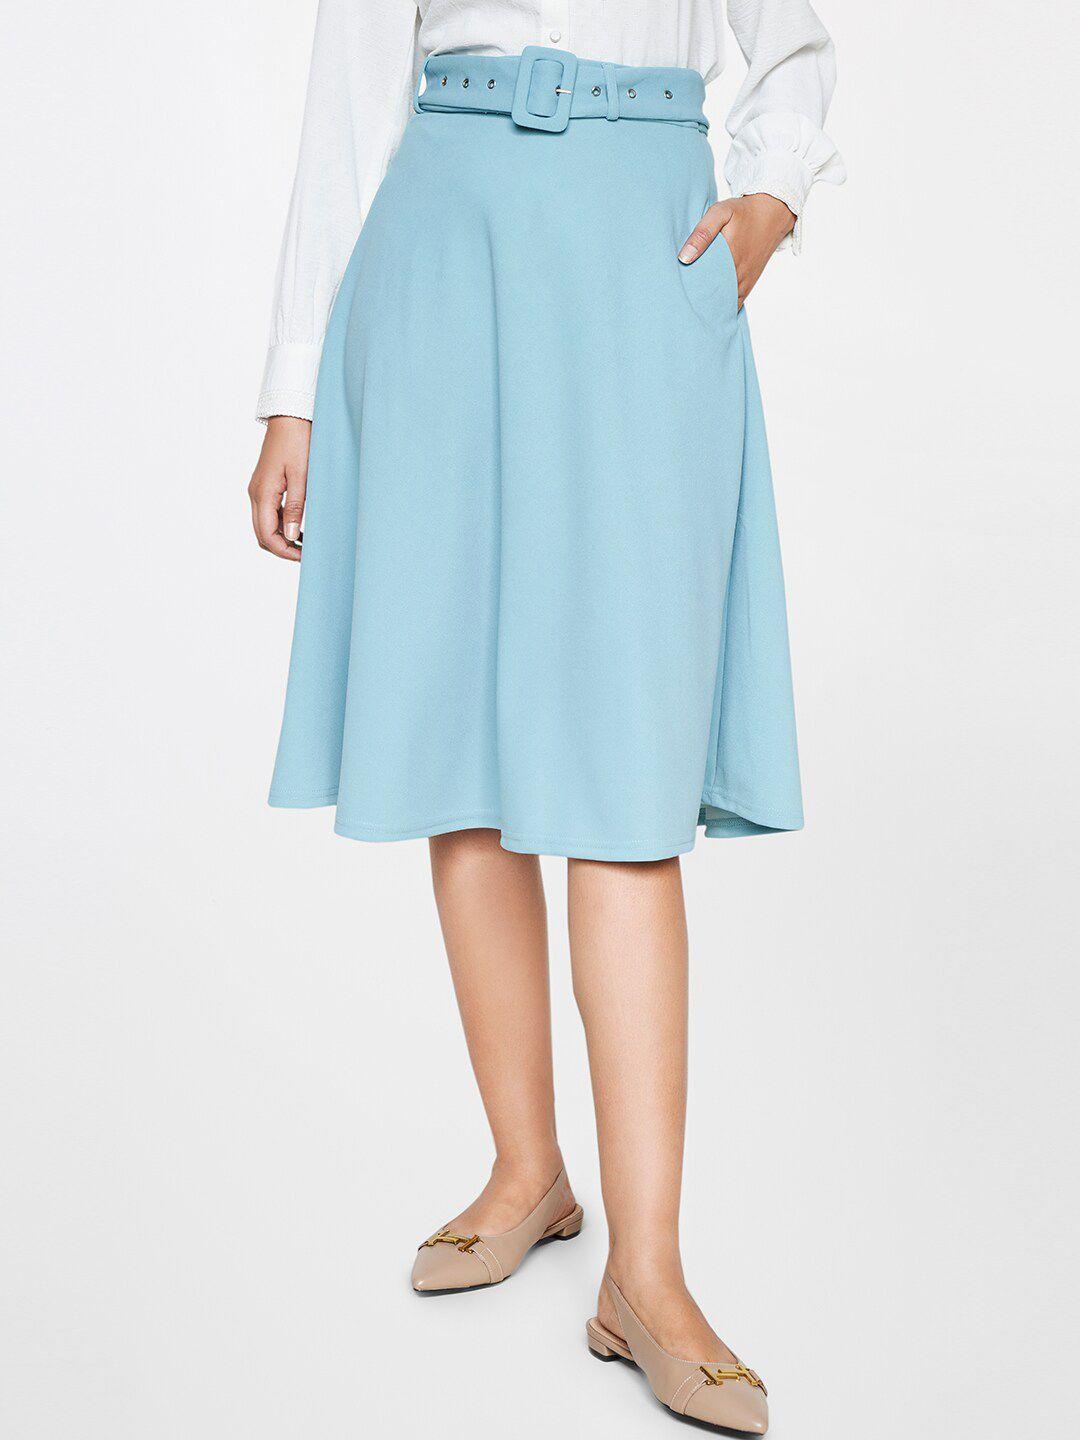 and-a-line-midi-length-flared-skirt-with-belt